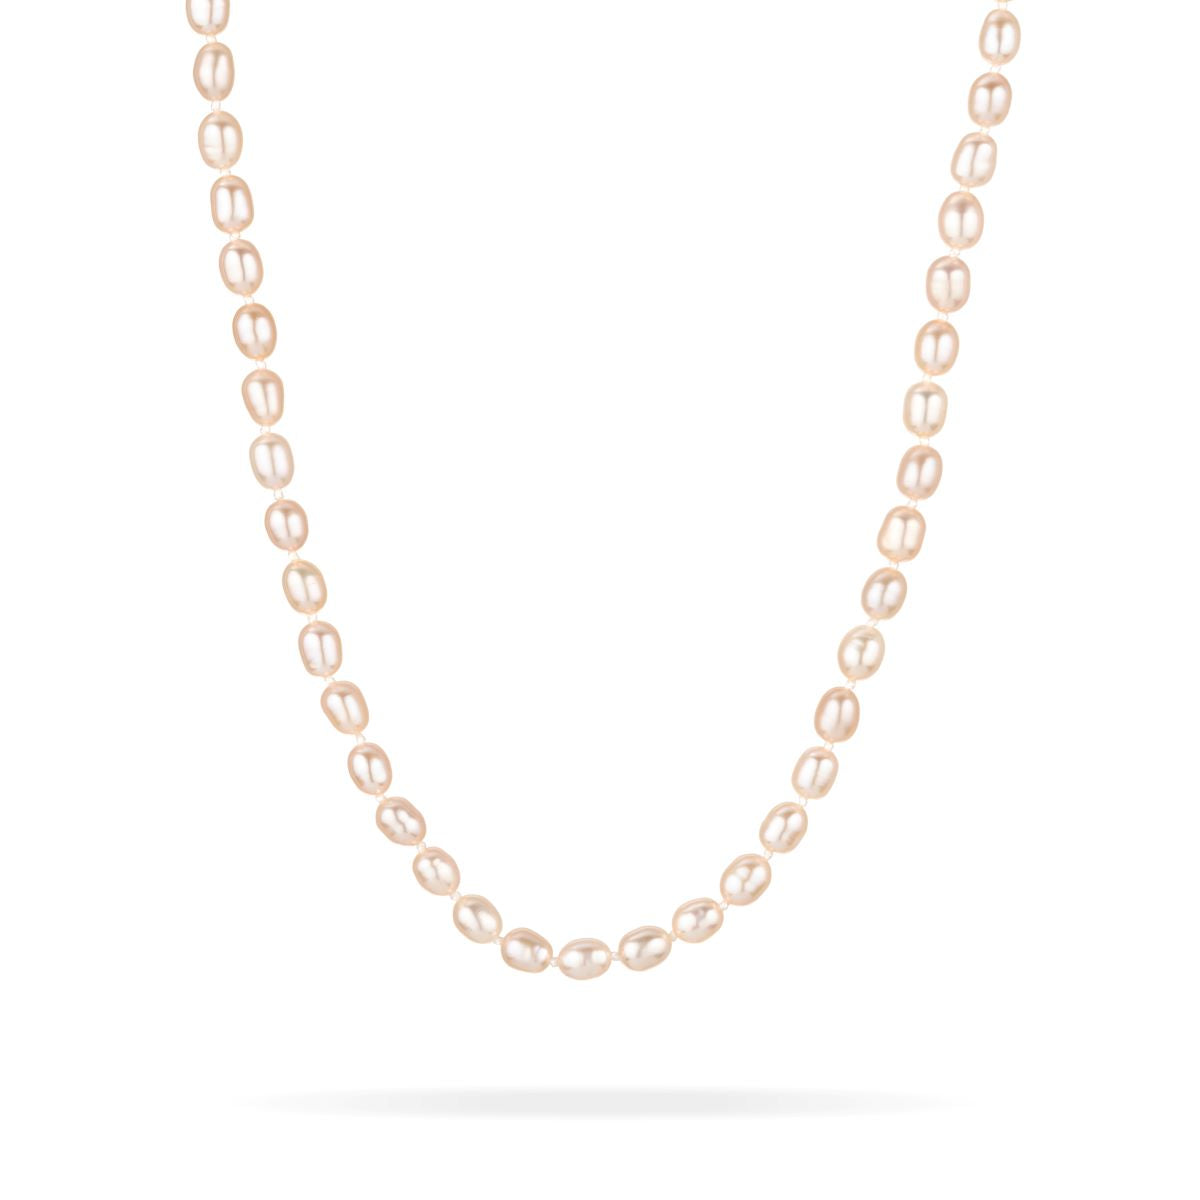 Antique Seed Pearl Necklace - Mother Daughter